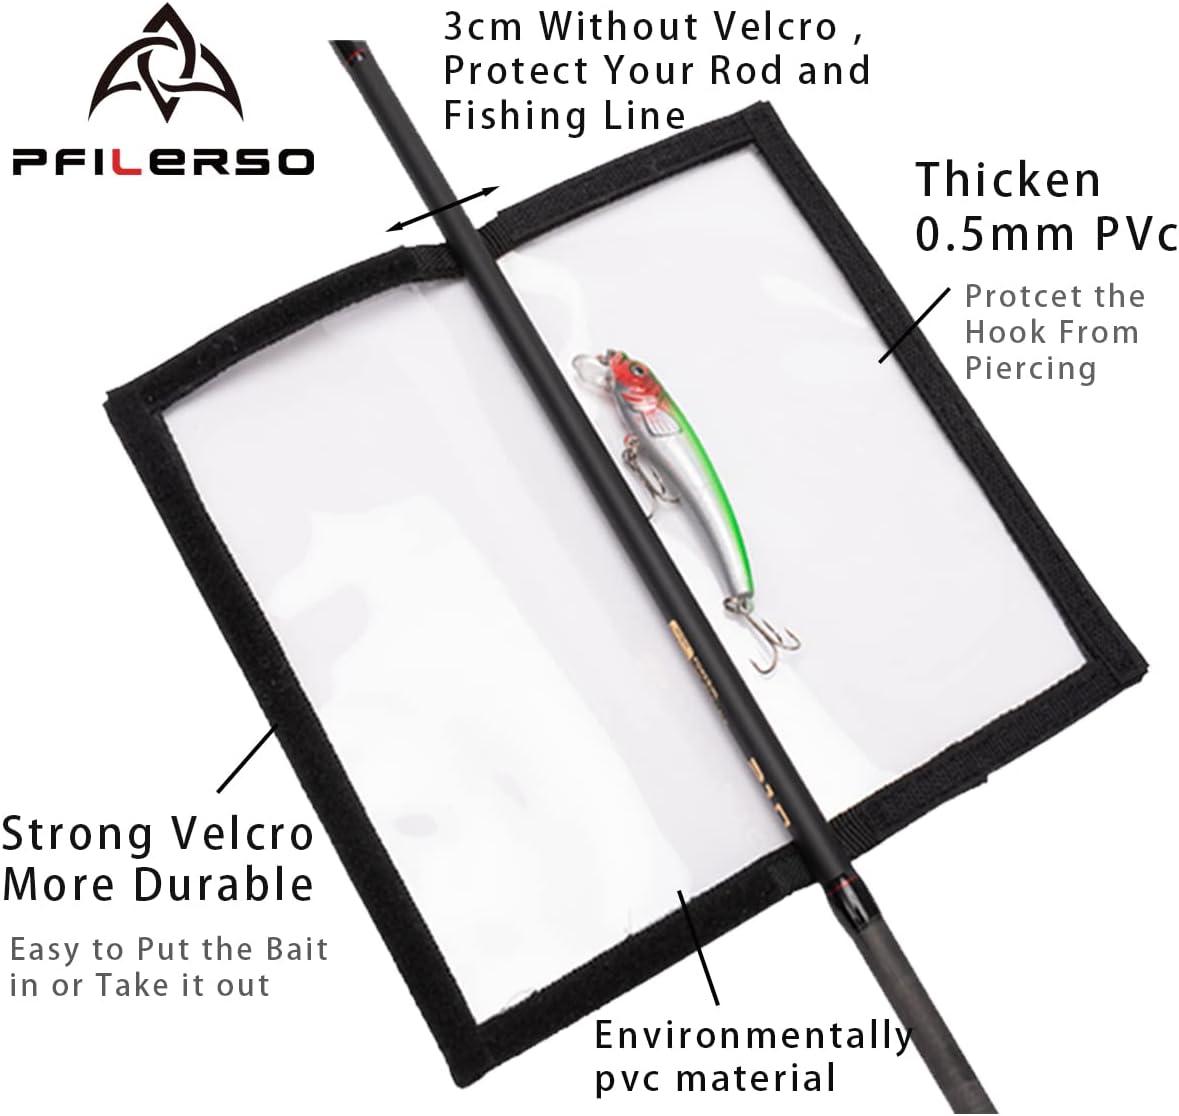 PFILERSO 20pcs Fishing Lure Wraps 2 Size Clear See-Through Thickened PVC  Fishing Hook Covers Protect Children Pets and Fishermen Safe from Sharp Hook  Fishing Bait Storage Organizer 10L+10M